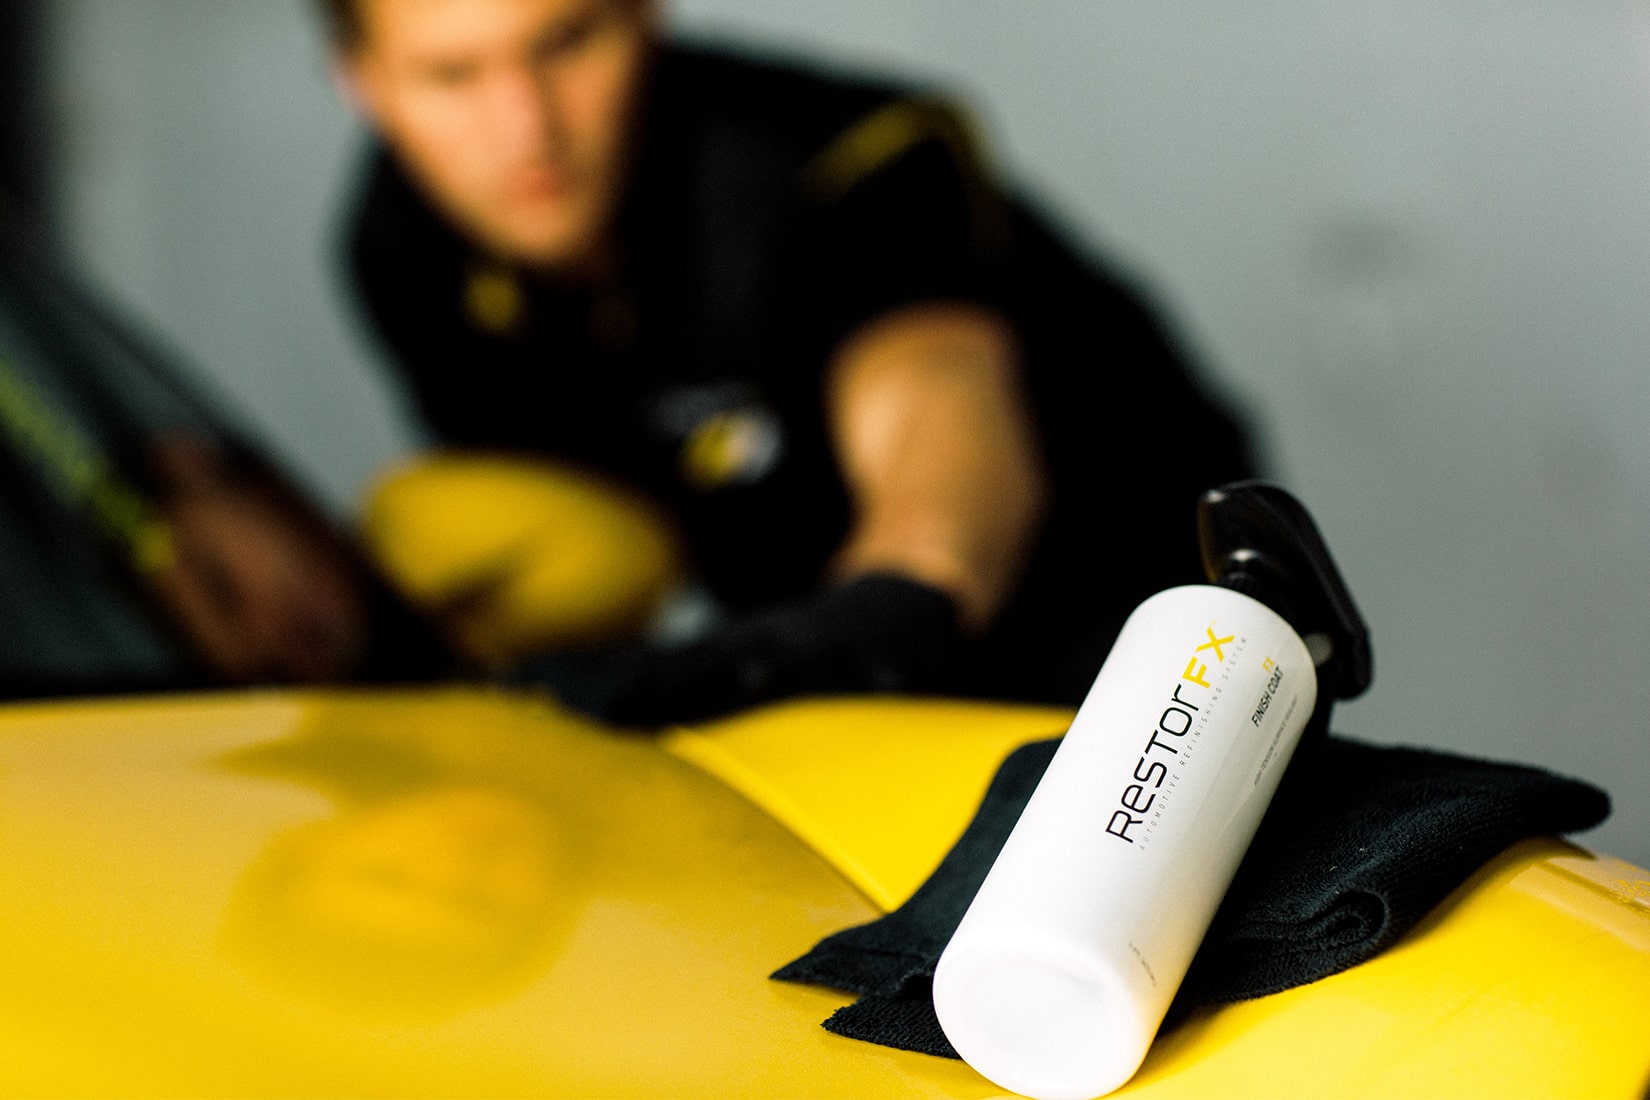 RestorFX Technician working expertly on a sleek yellow sports car with an overall blurred effect